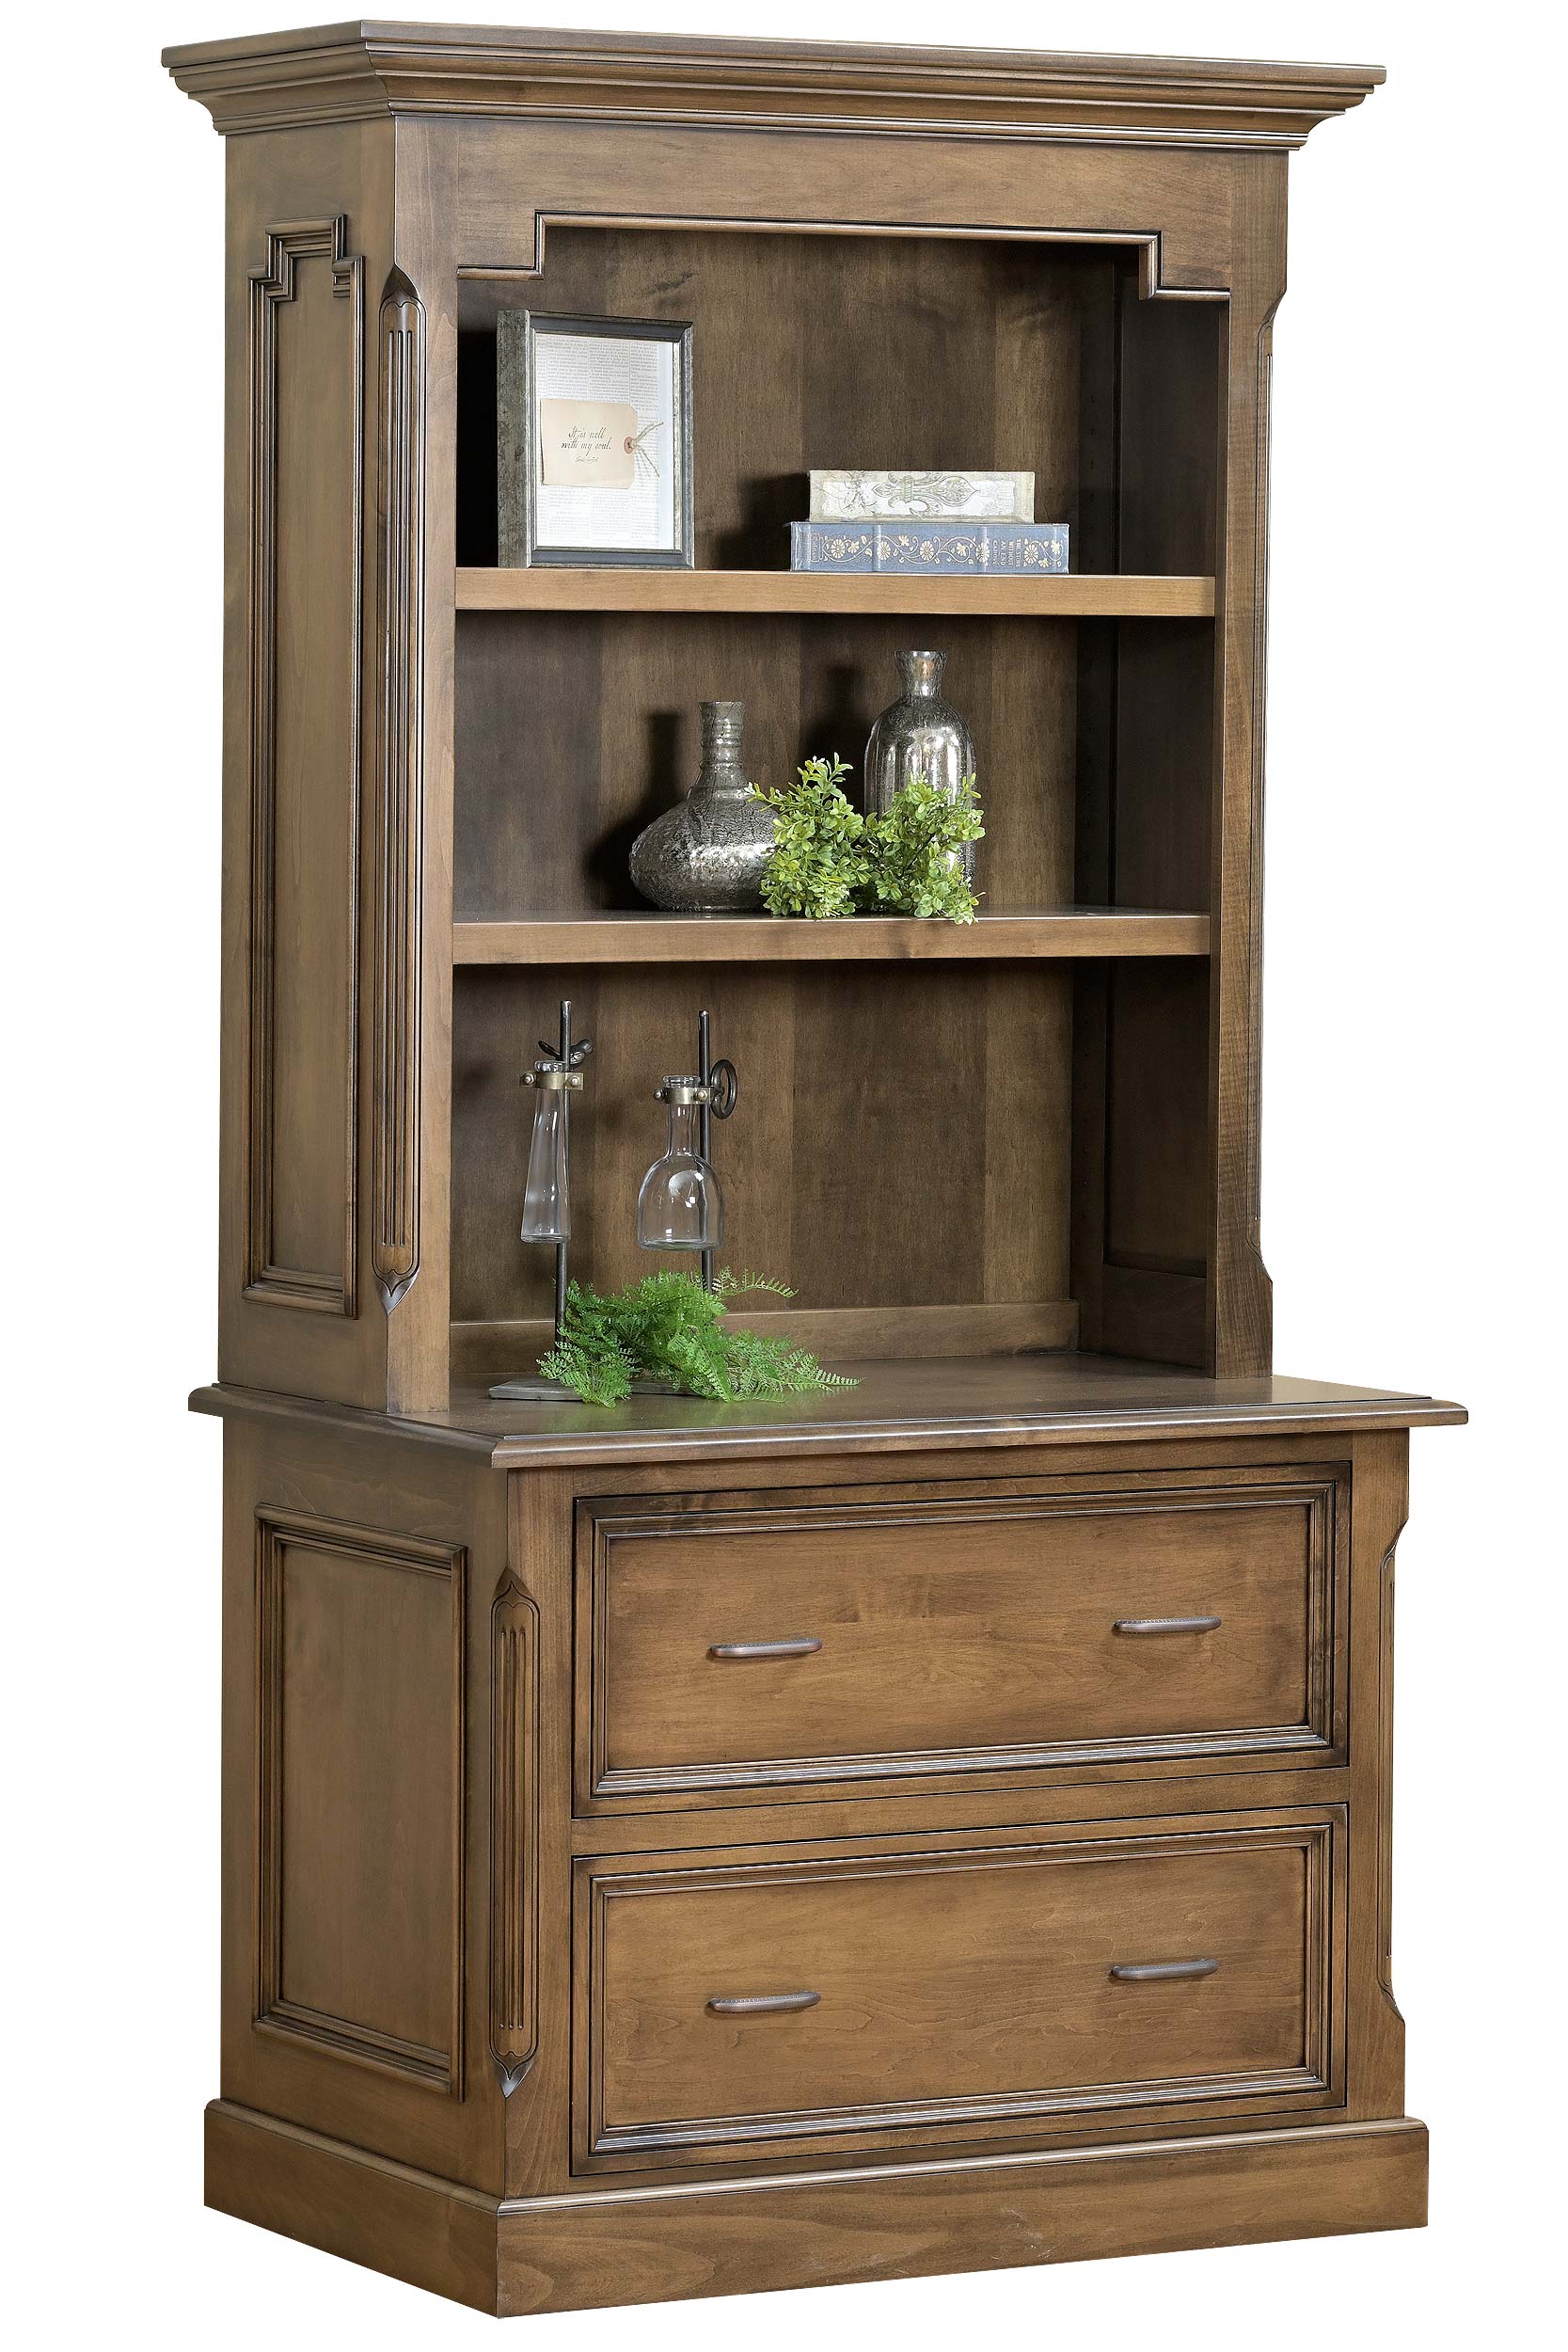 Amish Kingston Lateral File and Bookshelf Hutch